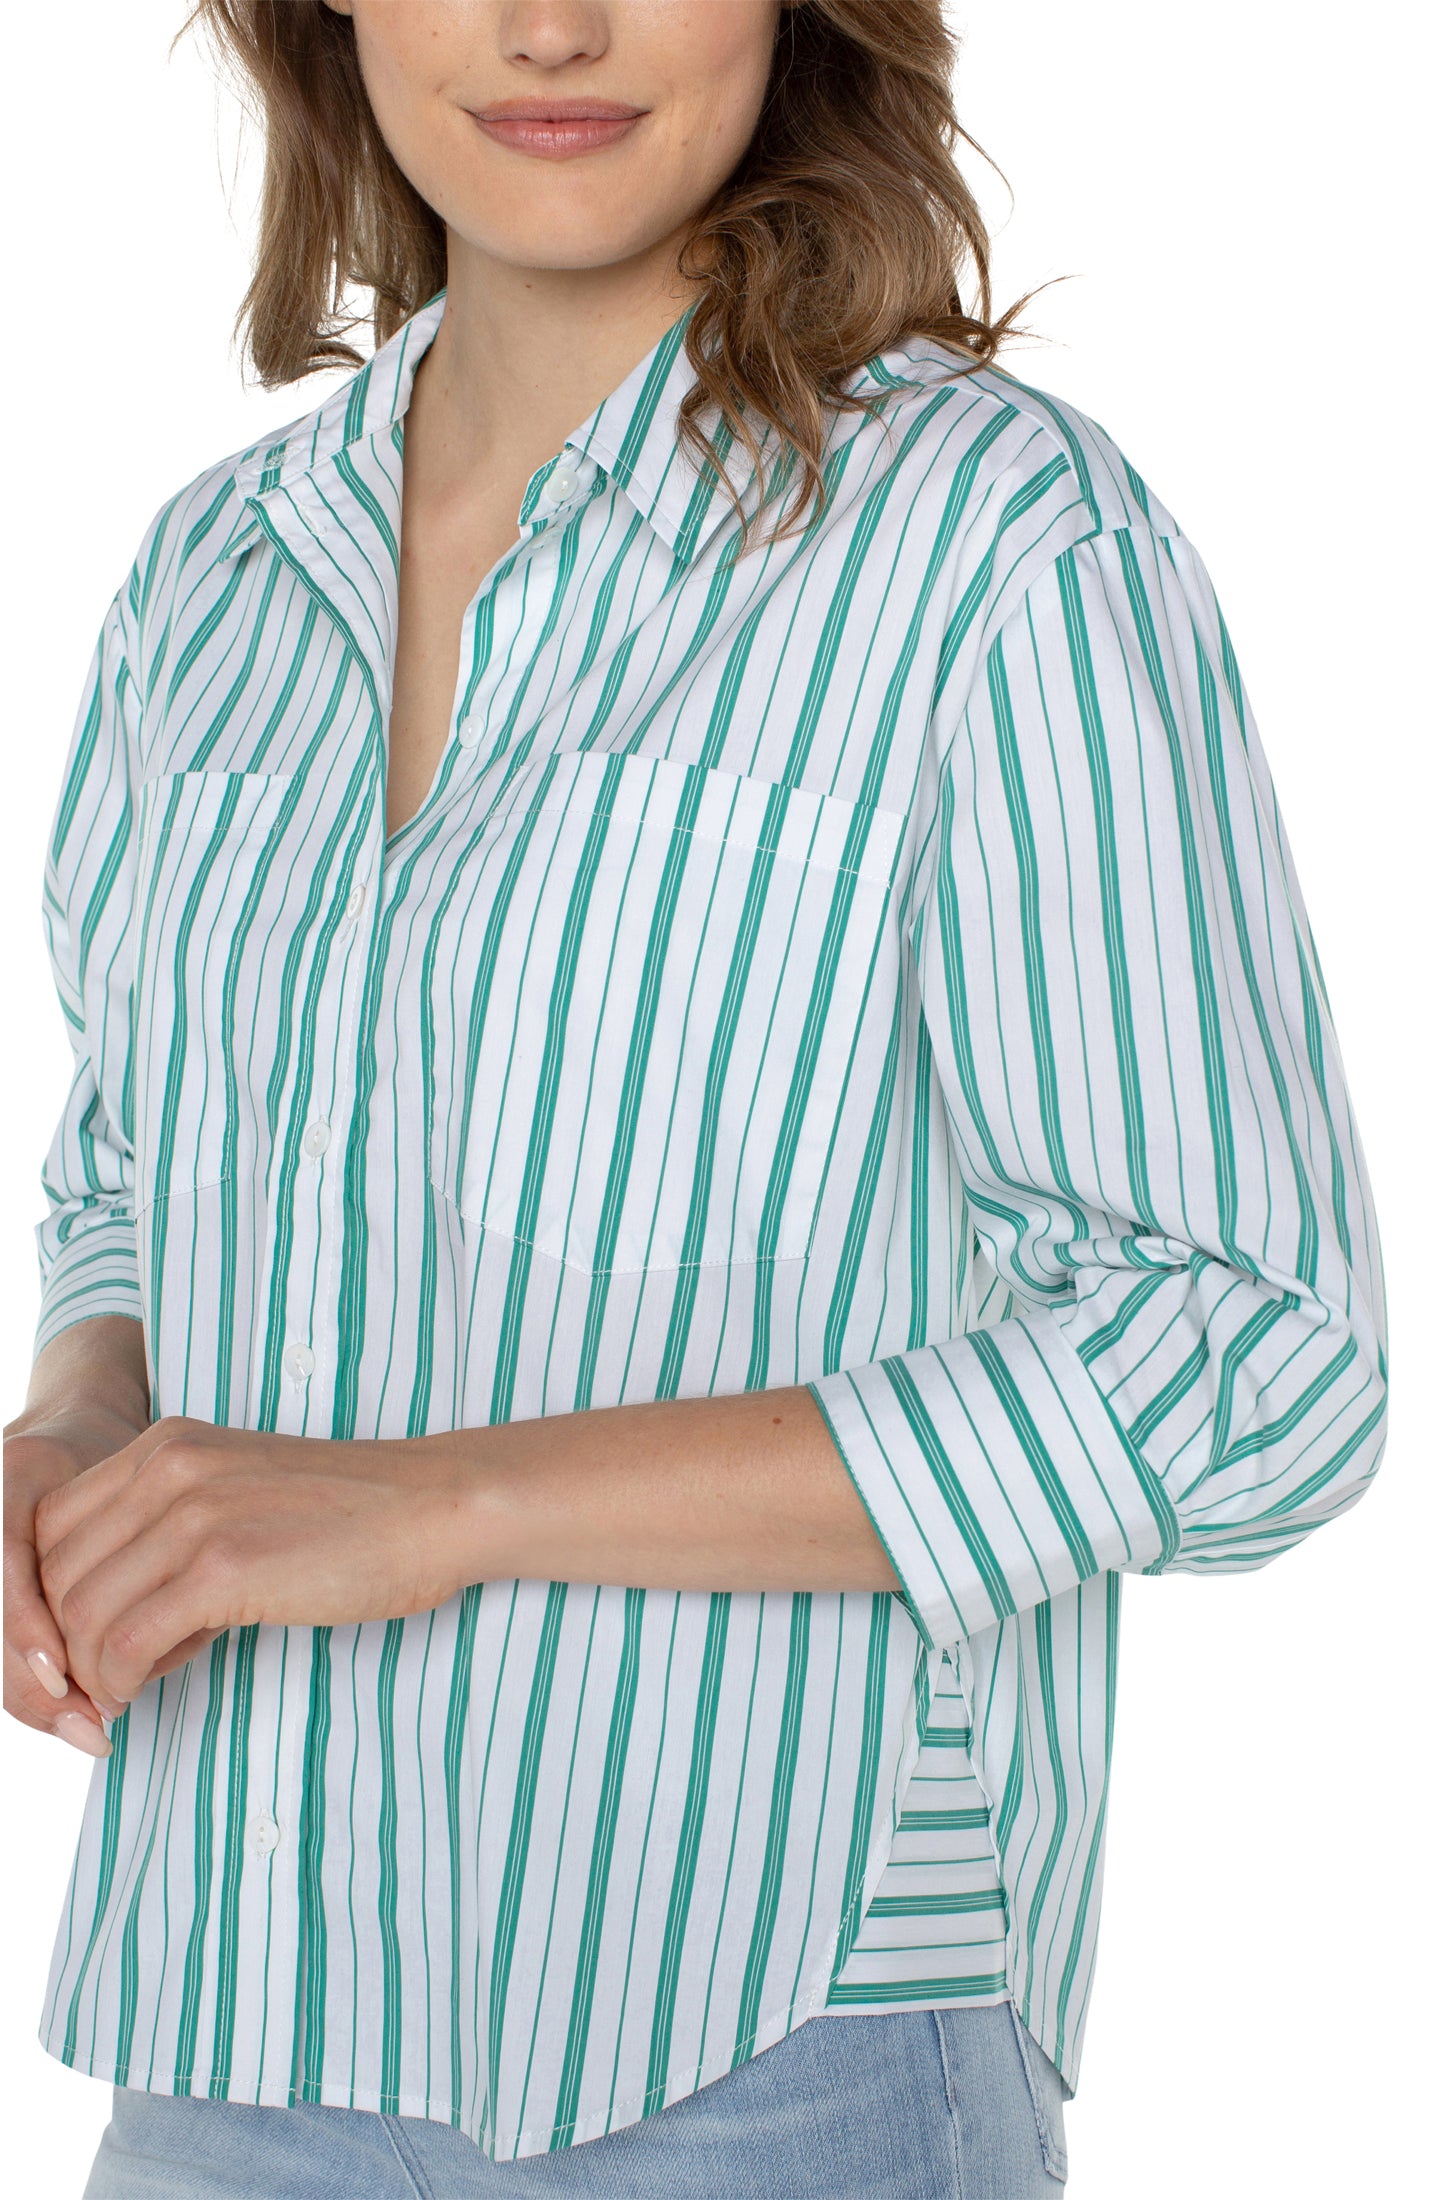 LVP 3/4 Sleeve Front Button - Teal White Stripe Stripe Close Up View